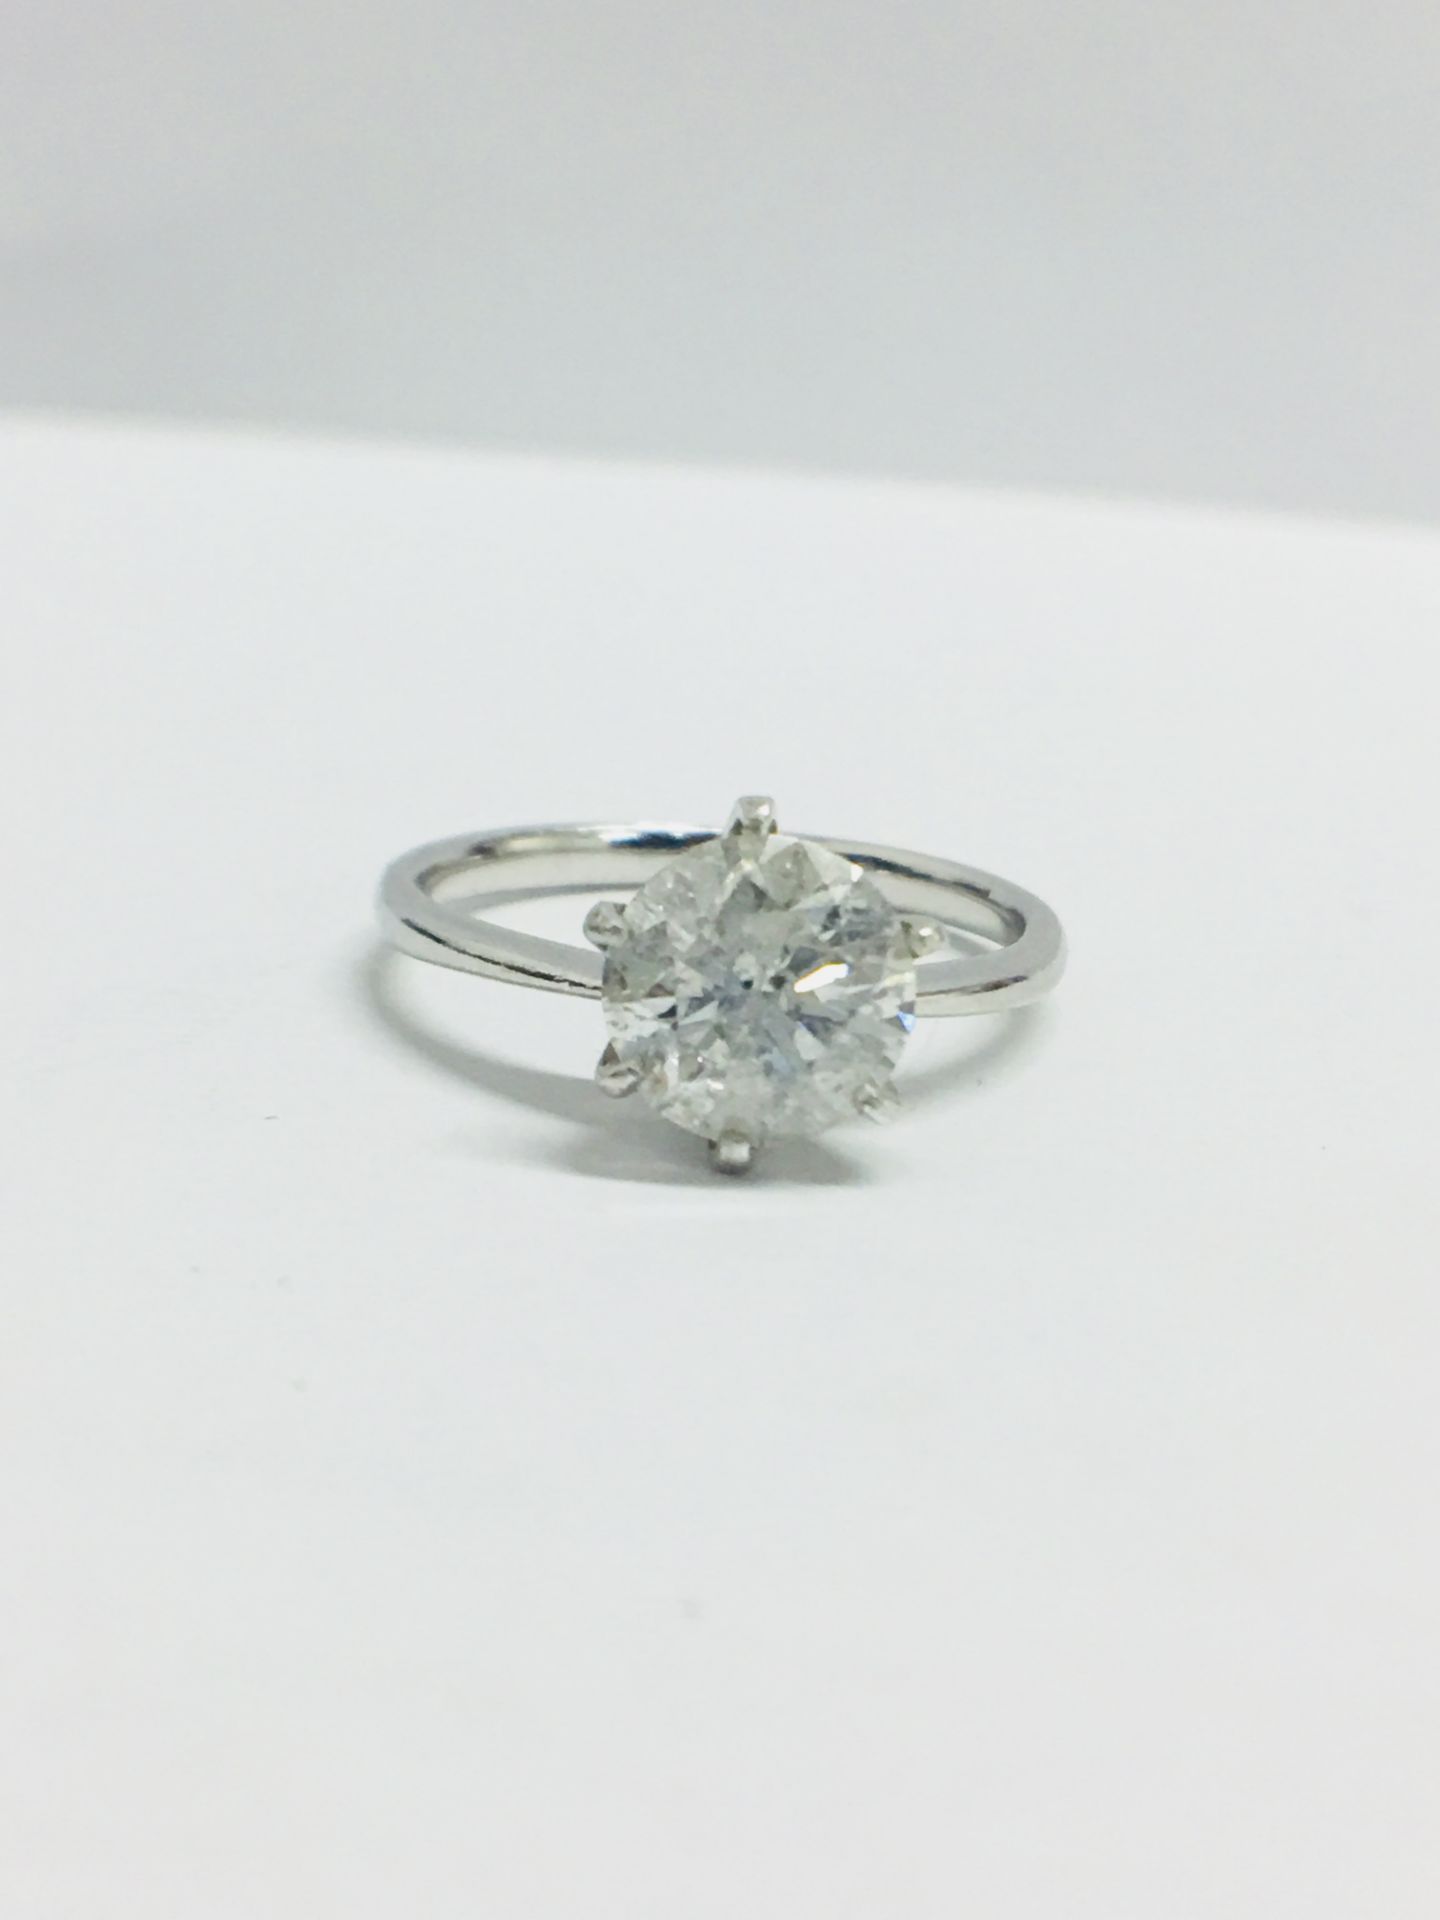 1.73ct diamond solitaire ring set in platinum. I colour and I1 clarity. 4 claw setting. Ring size M. - Image 2 of 6